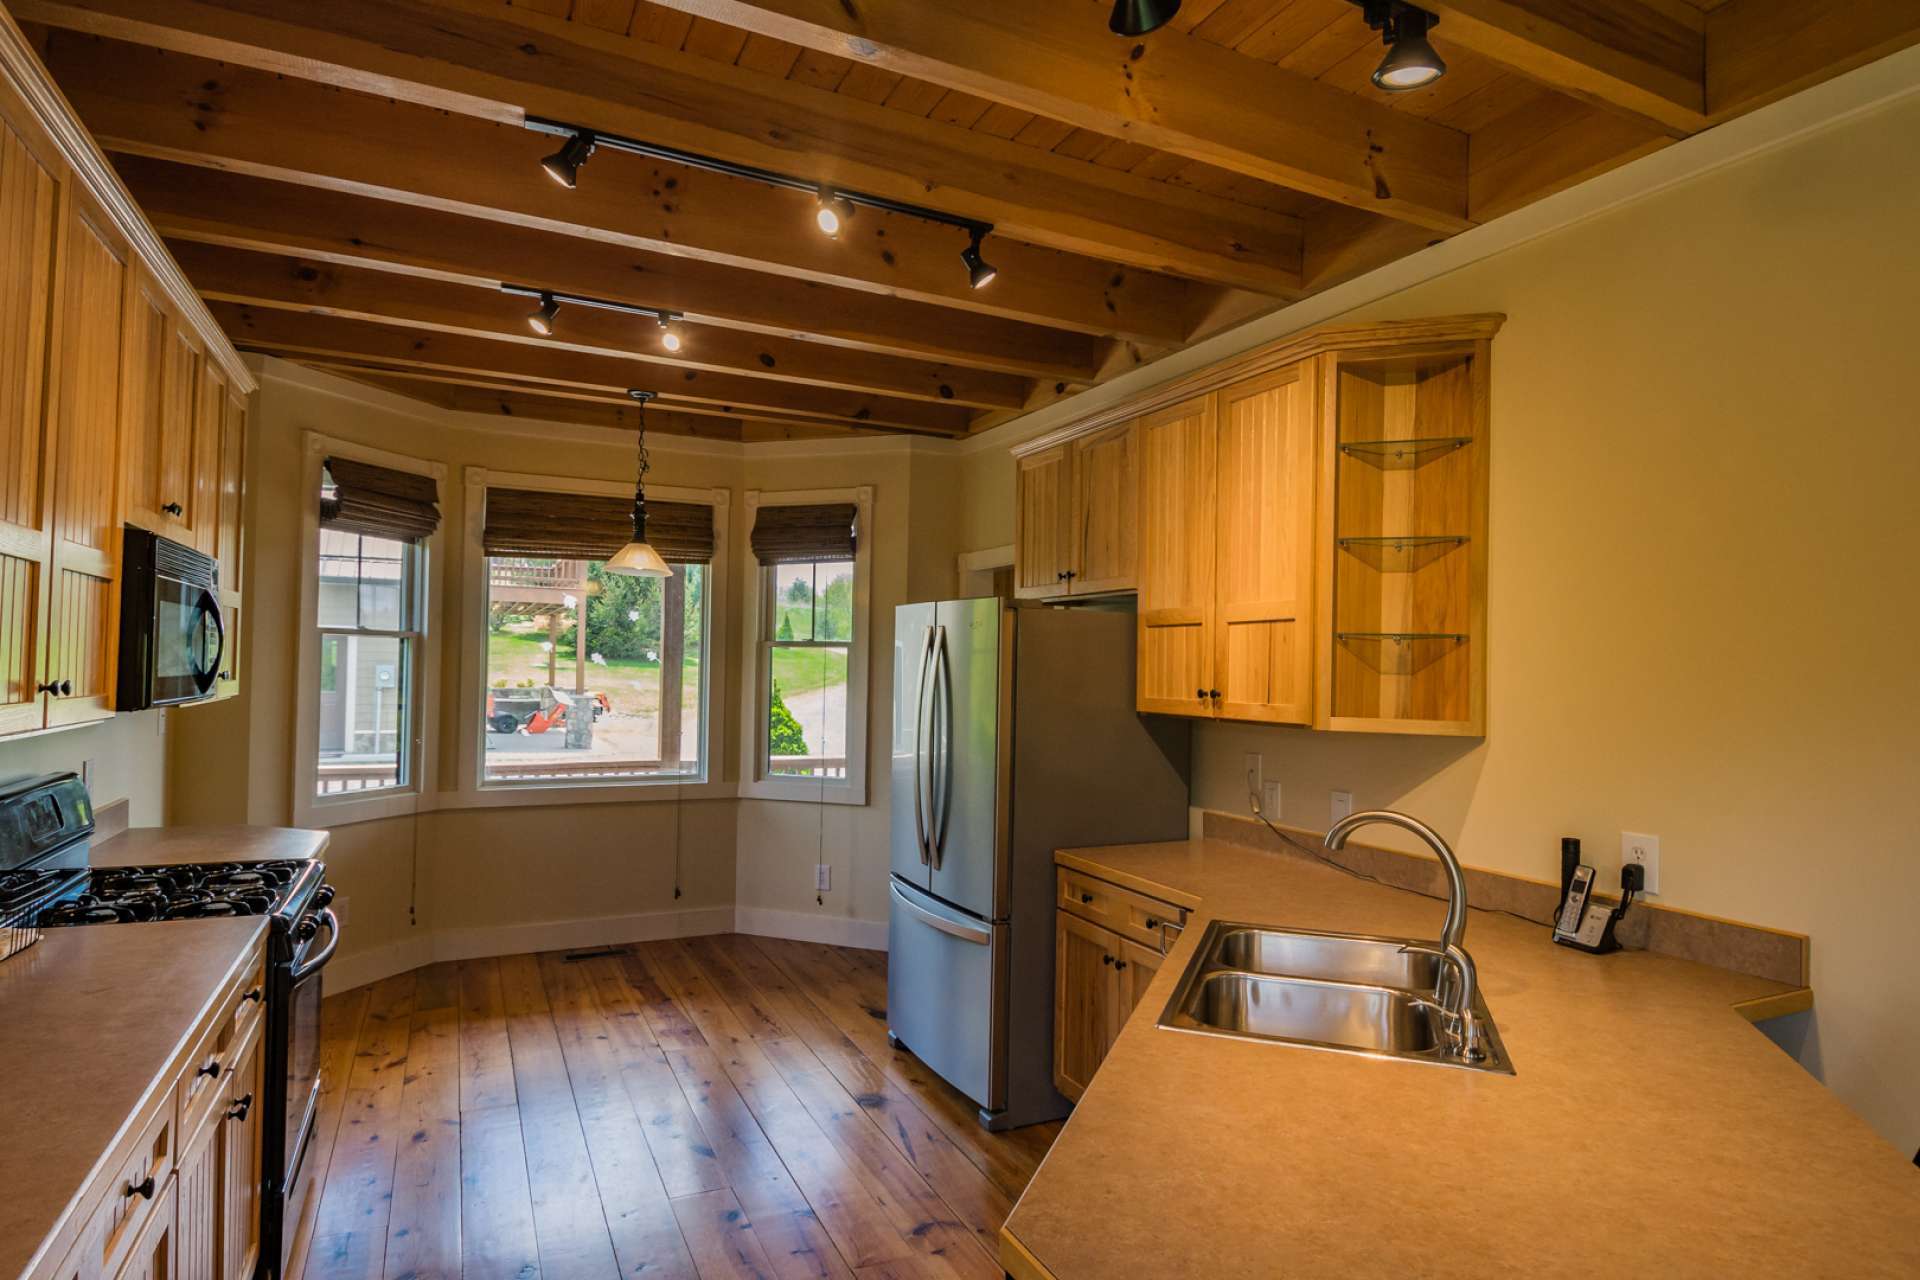 Enjoy breakfast with views of the outdoors through all four seasons in the  cozy nook with lots of windows.